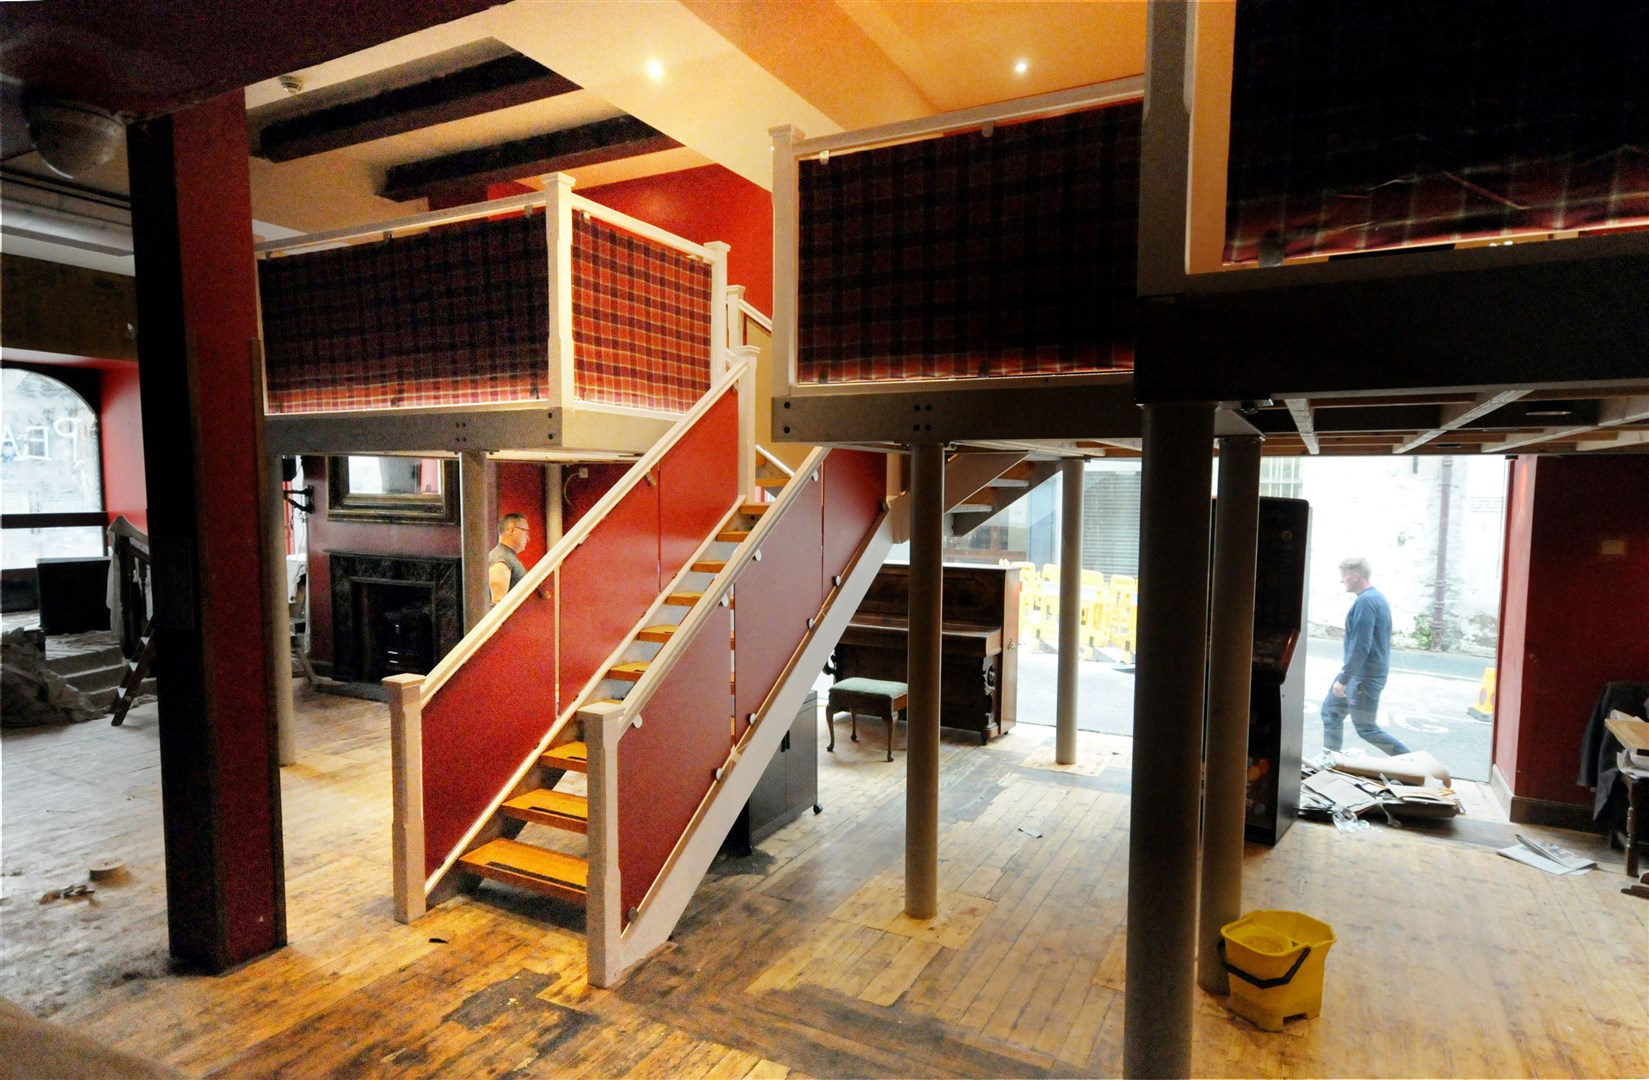 A mezzanine has been installed in the main downstairs bar and restaurant.